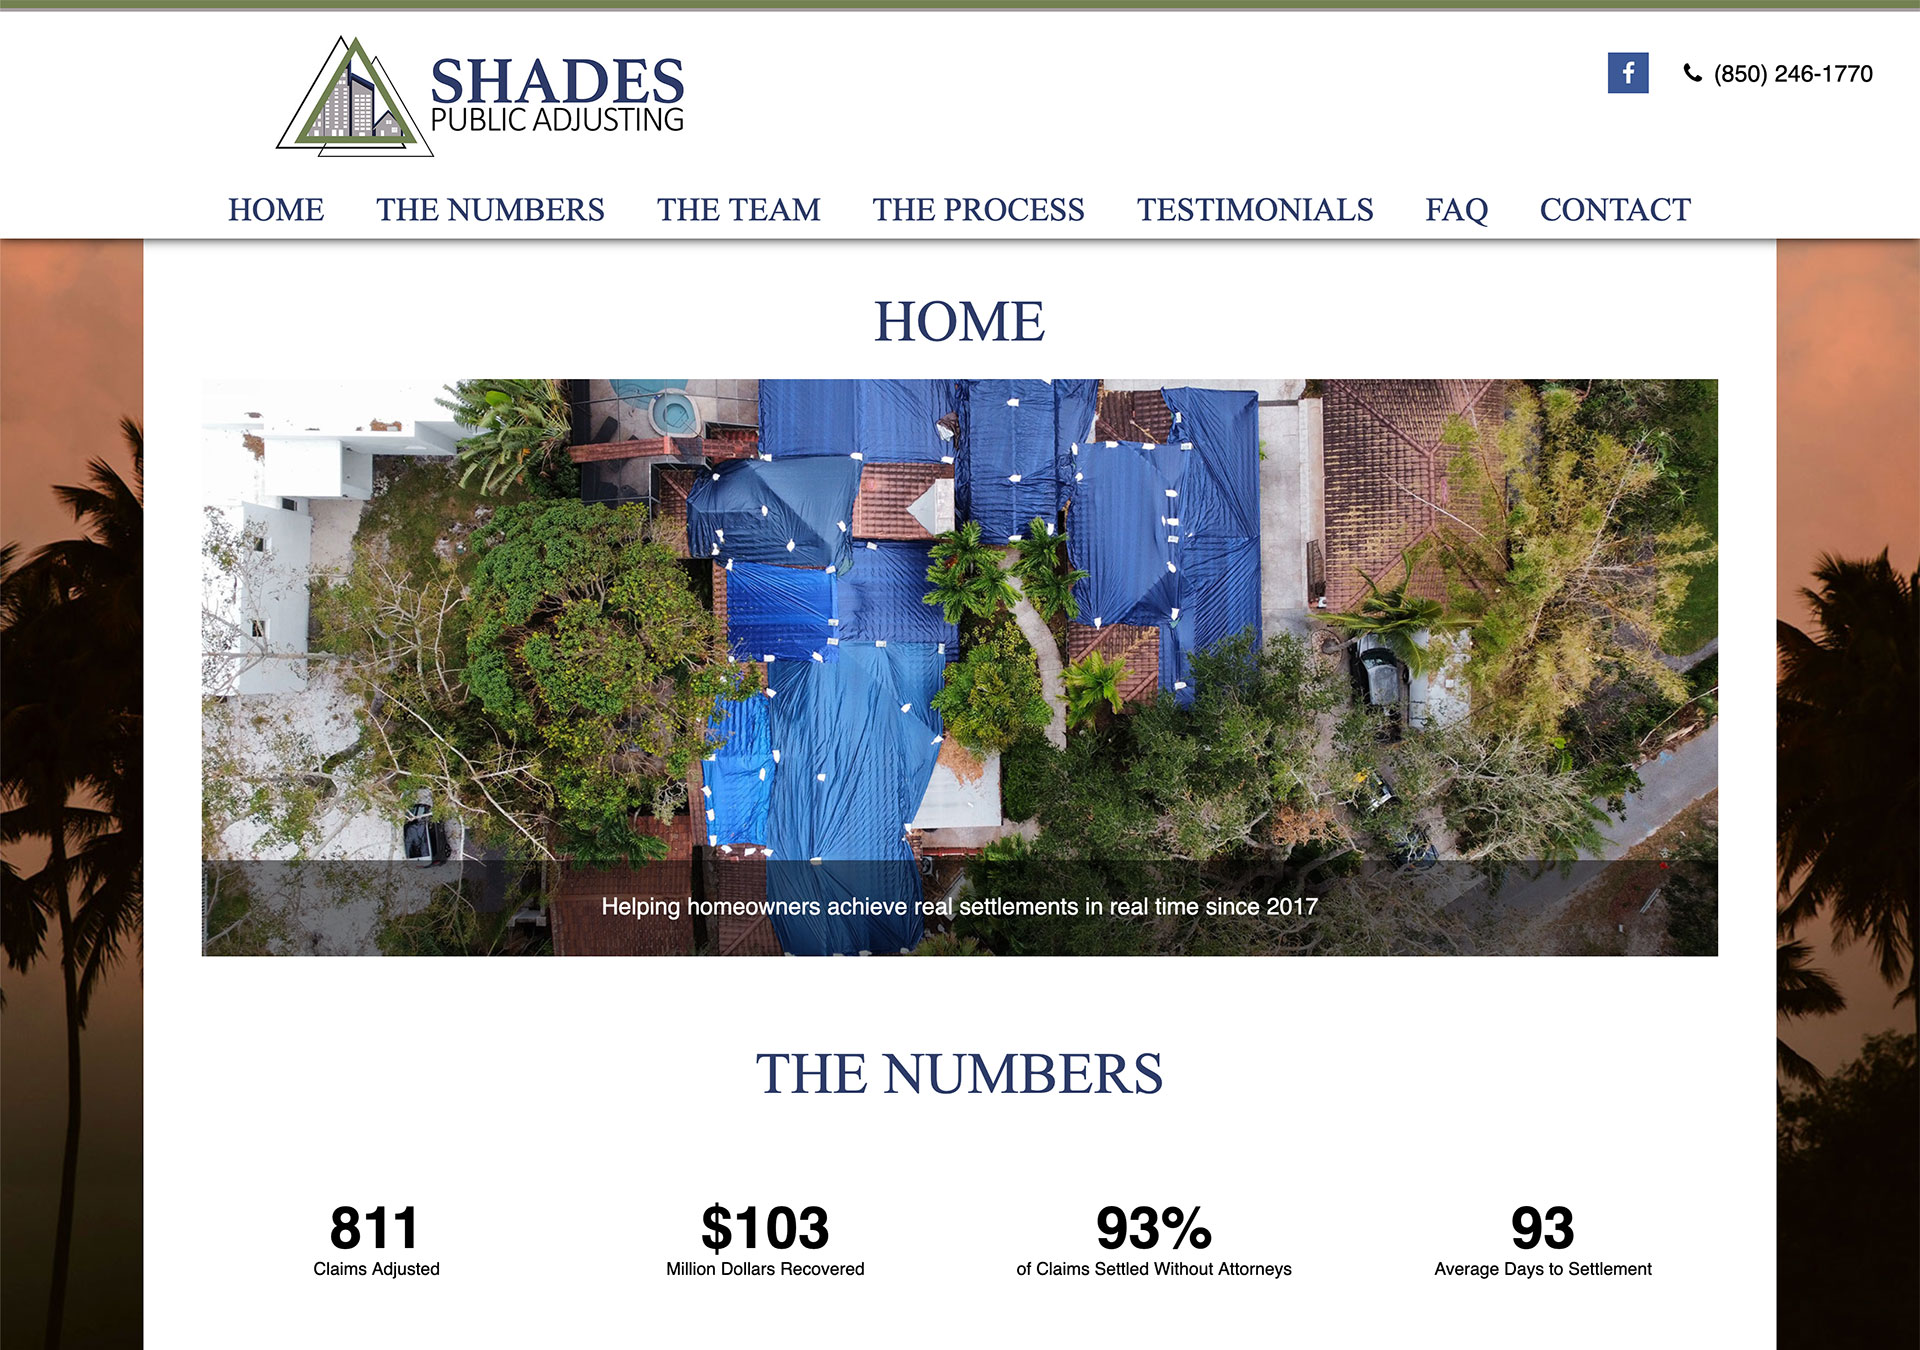 New Website Launched: Shades Consulting